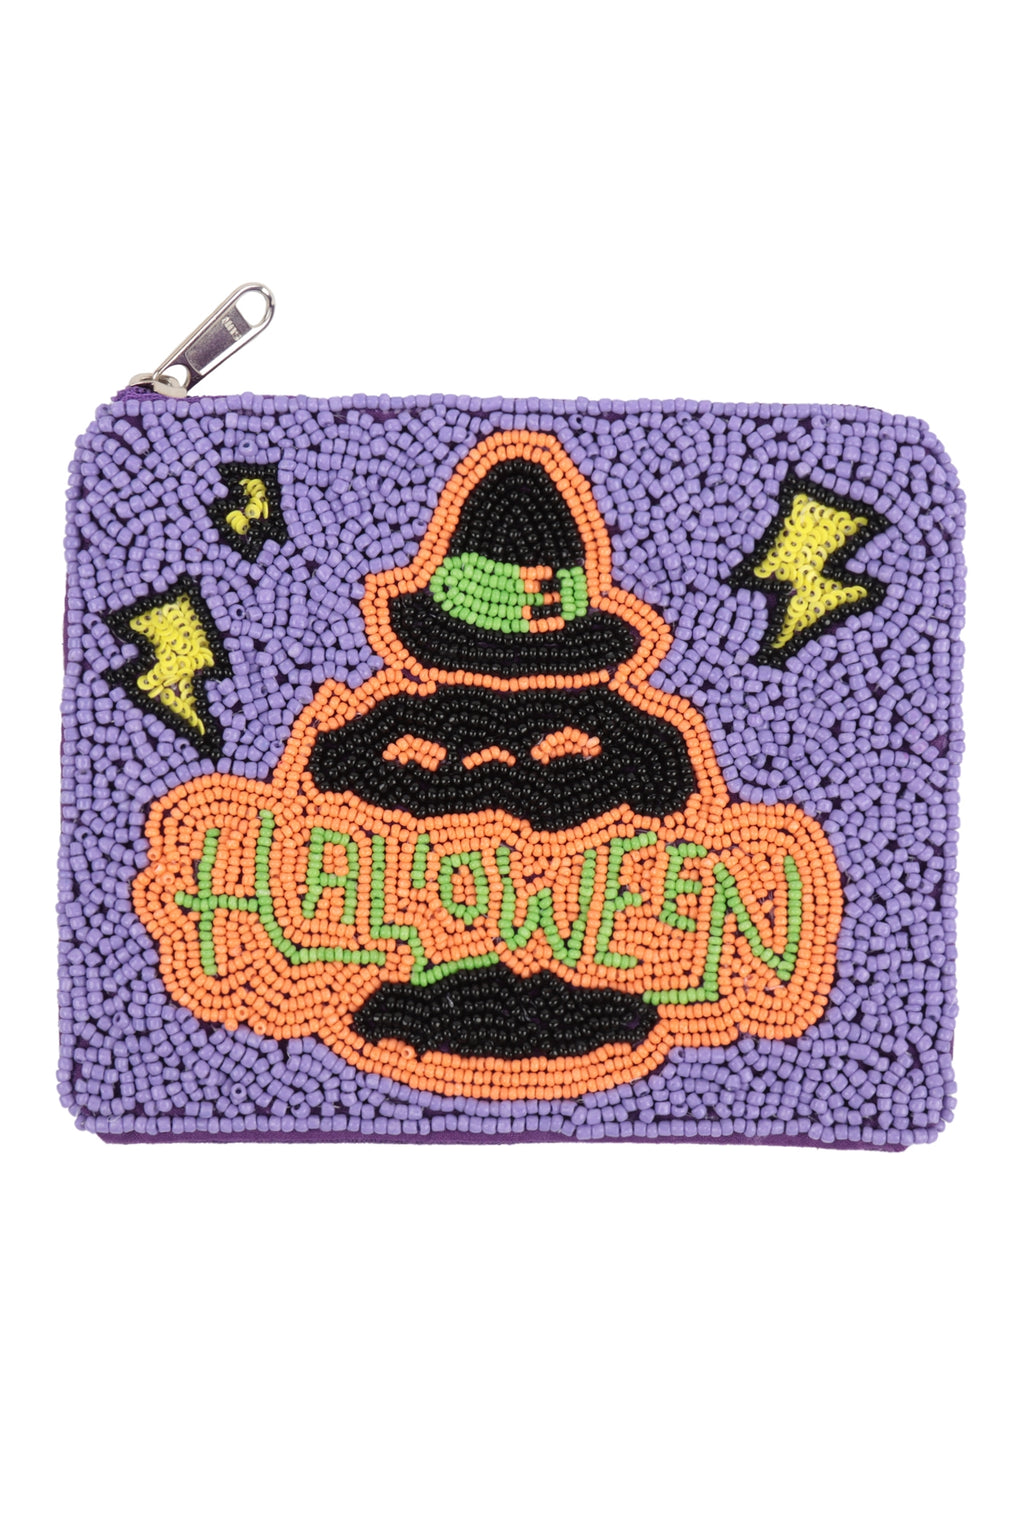 Pumpkin Halloween Seed Beads Coin Pouch Purple - Pack of 6